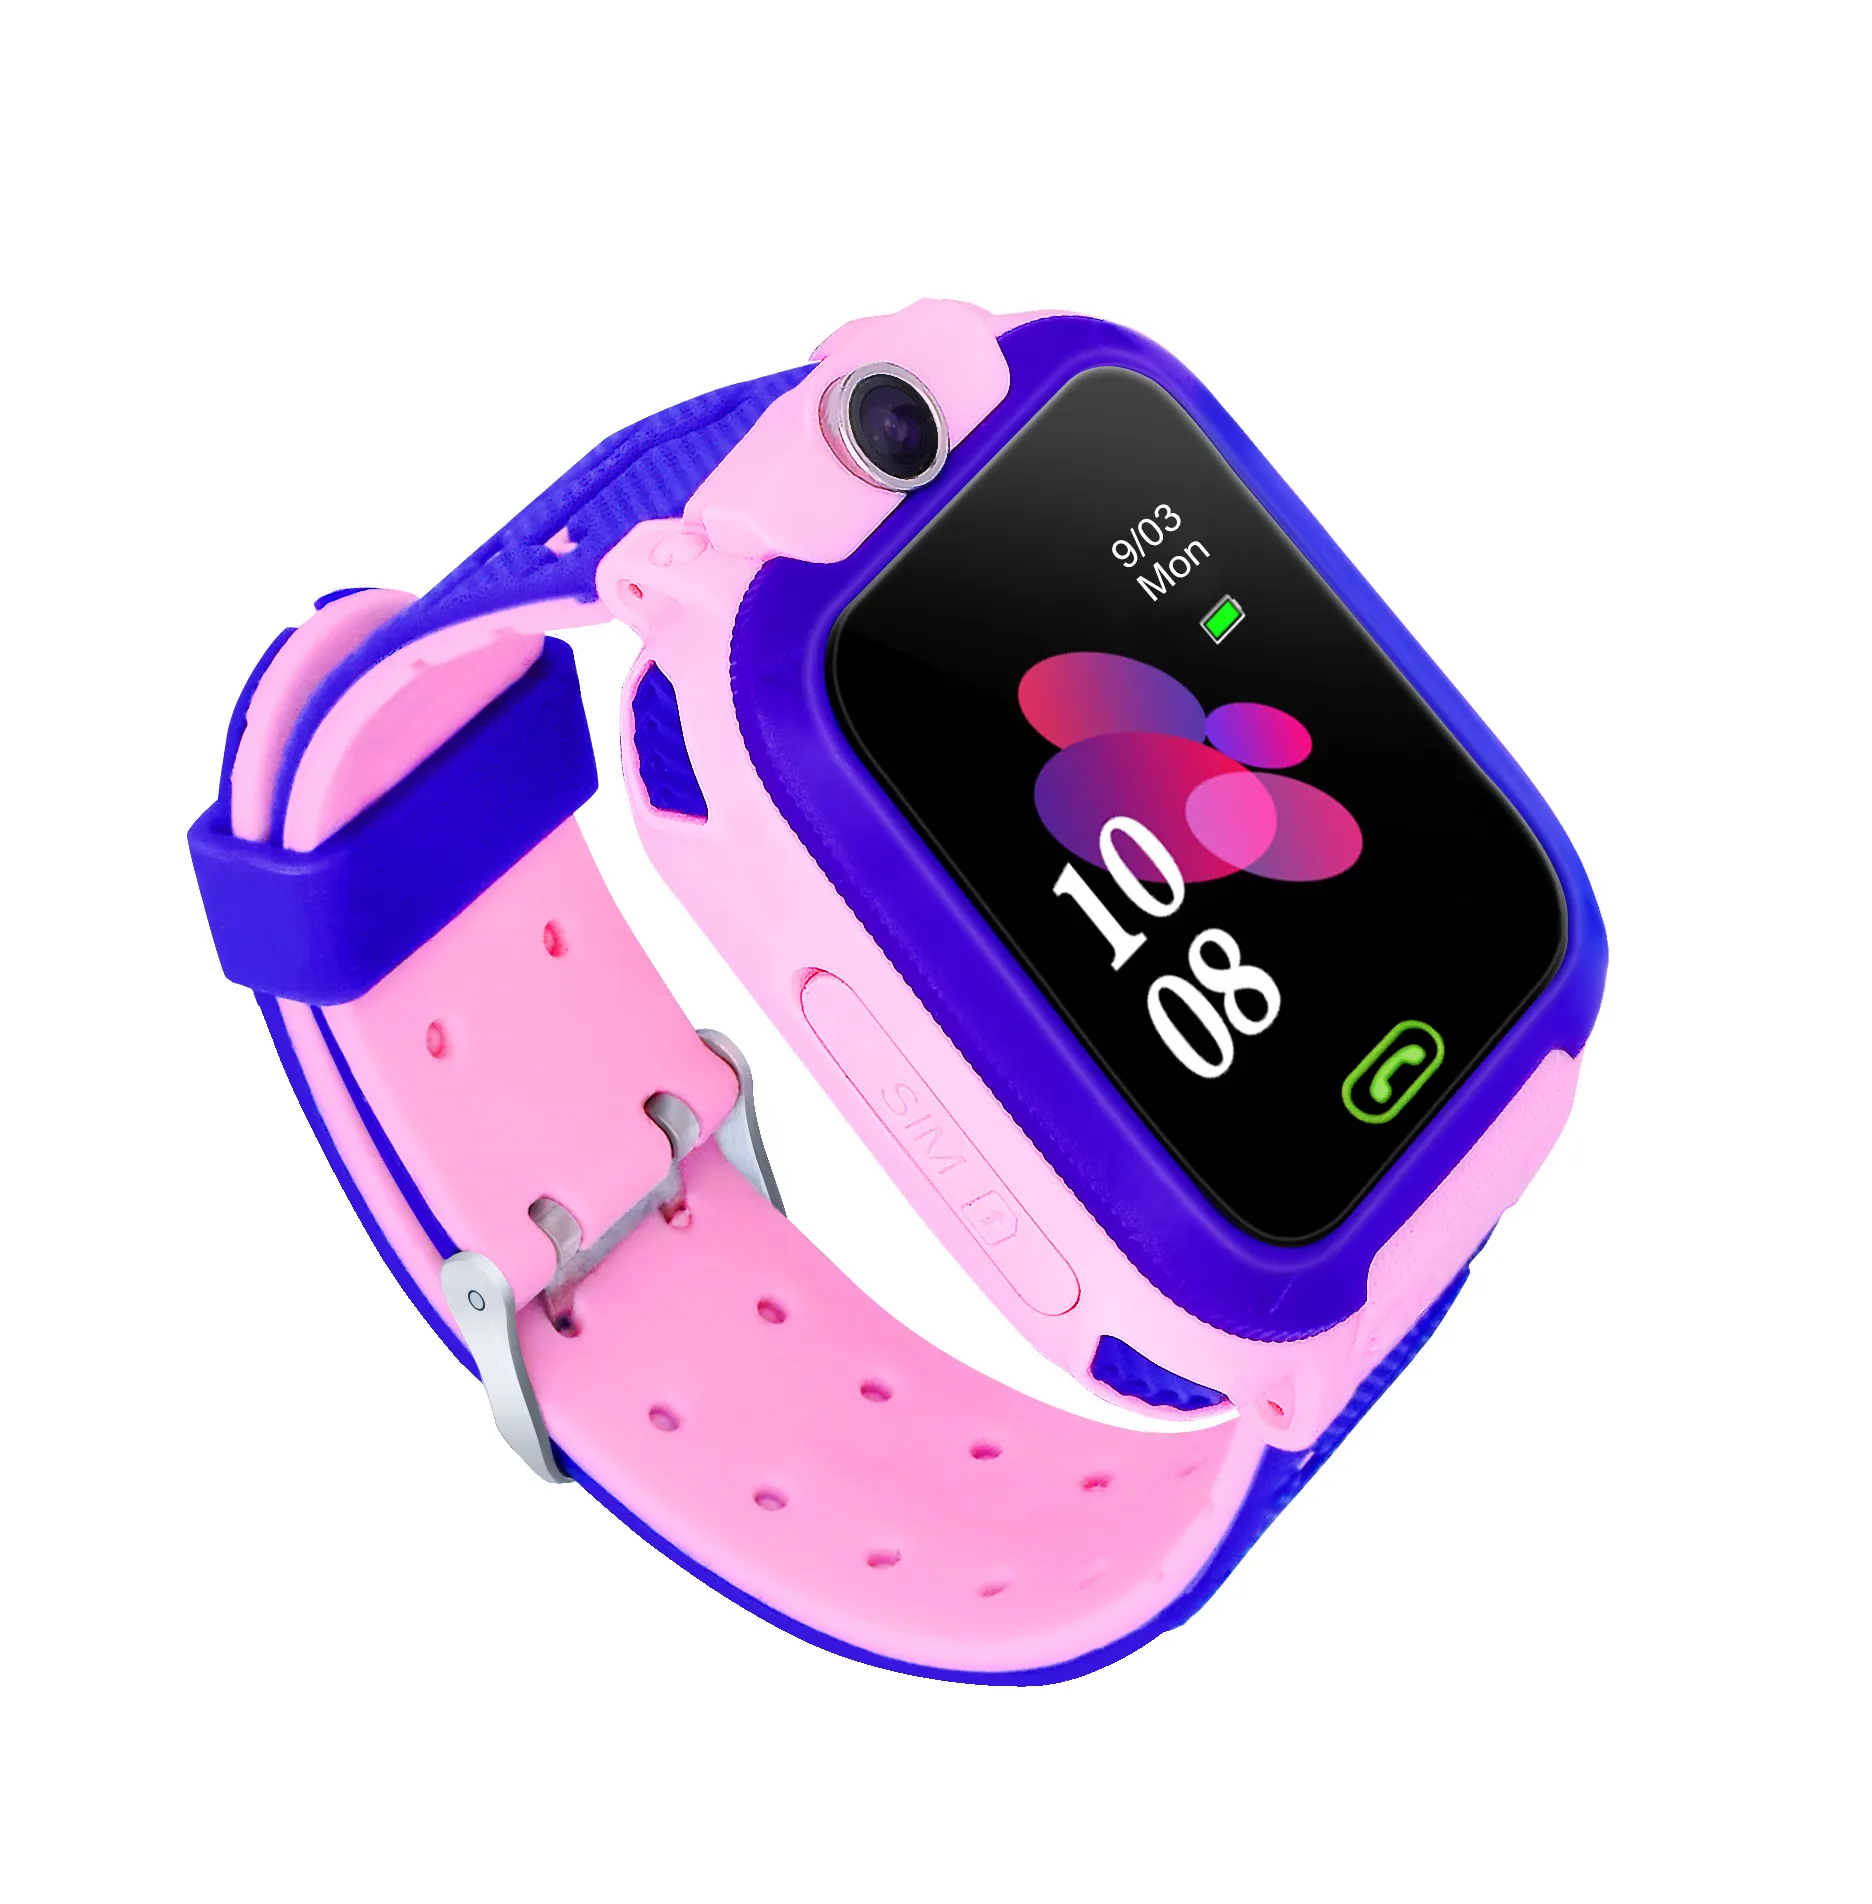 Full screen touch 1.44 display Silicone camera SOS call 2G SIM Calling LBS Tracker Watch GPS Kid Watch with Games and Video Call